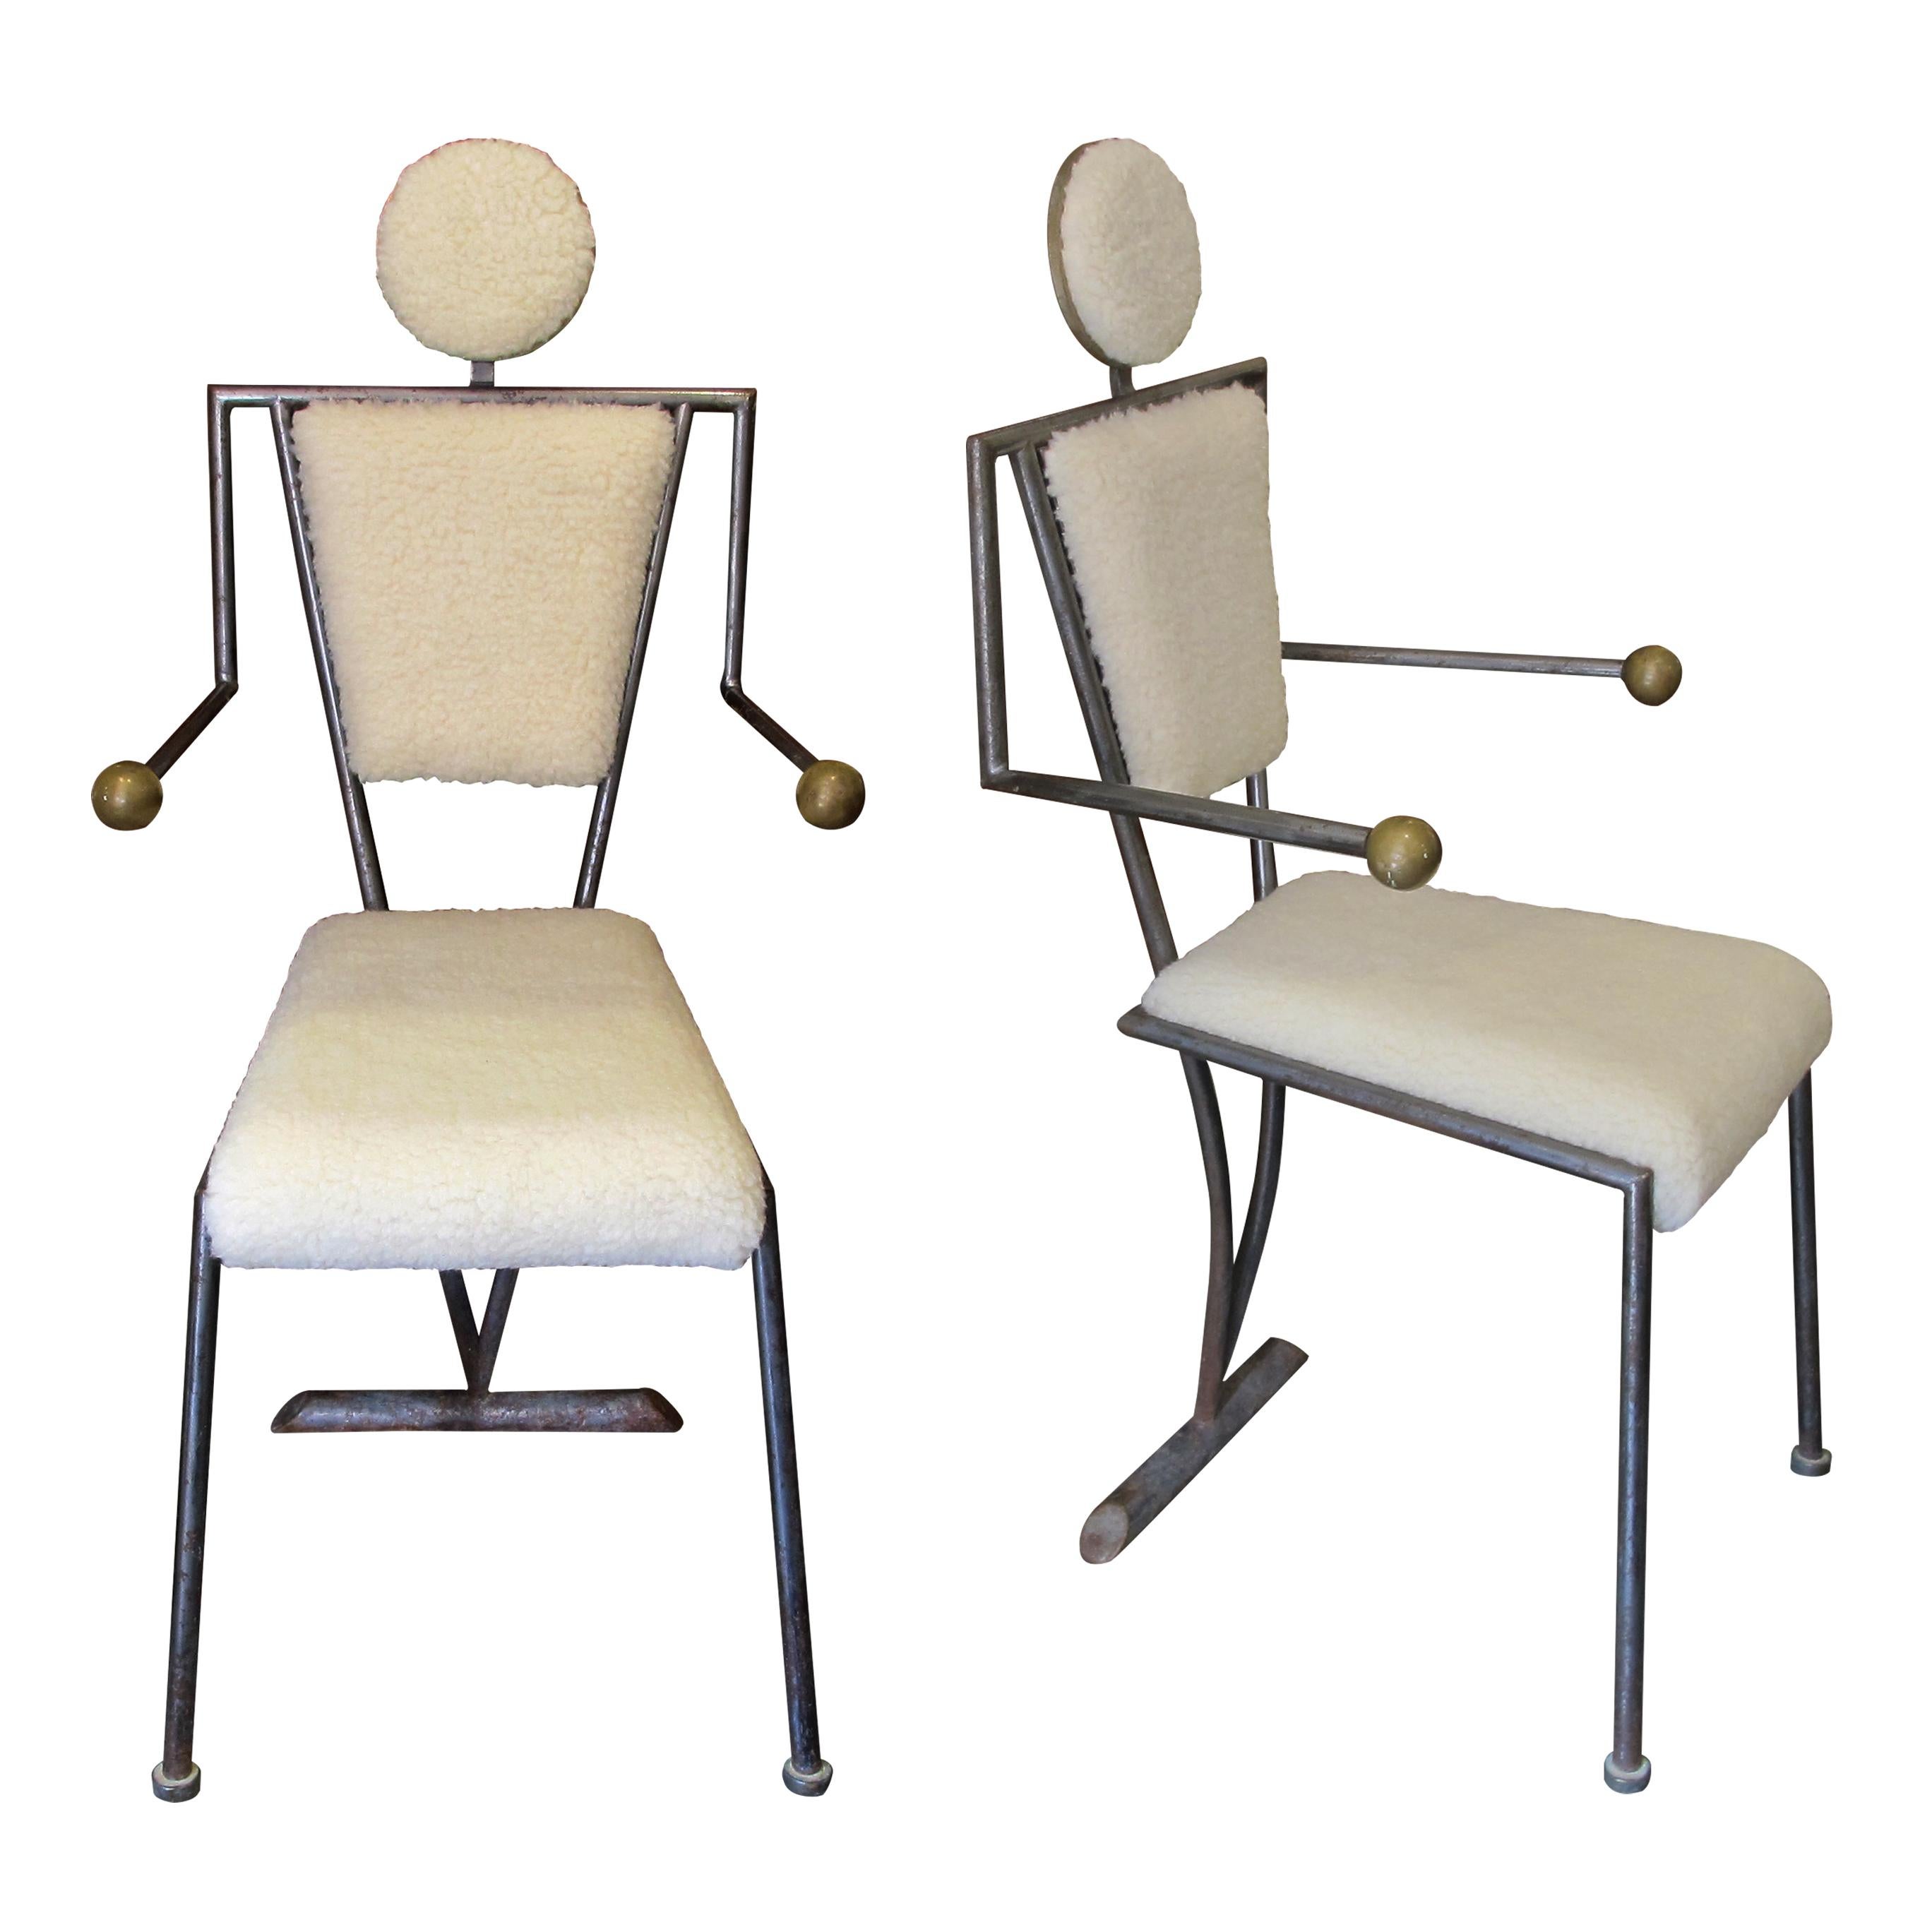 A pair of very unusual occasional chairs designed to mimic a person sitting down making them a real talking point. The armchairs have been newly reupholstered with a lamb-mix fabric and are very comfortable. The frame is very well-balanced and